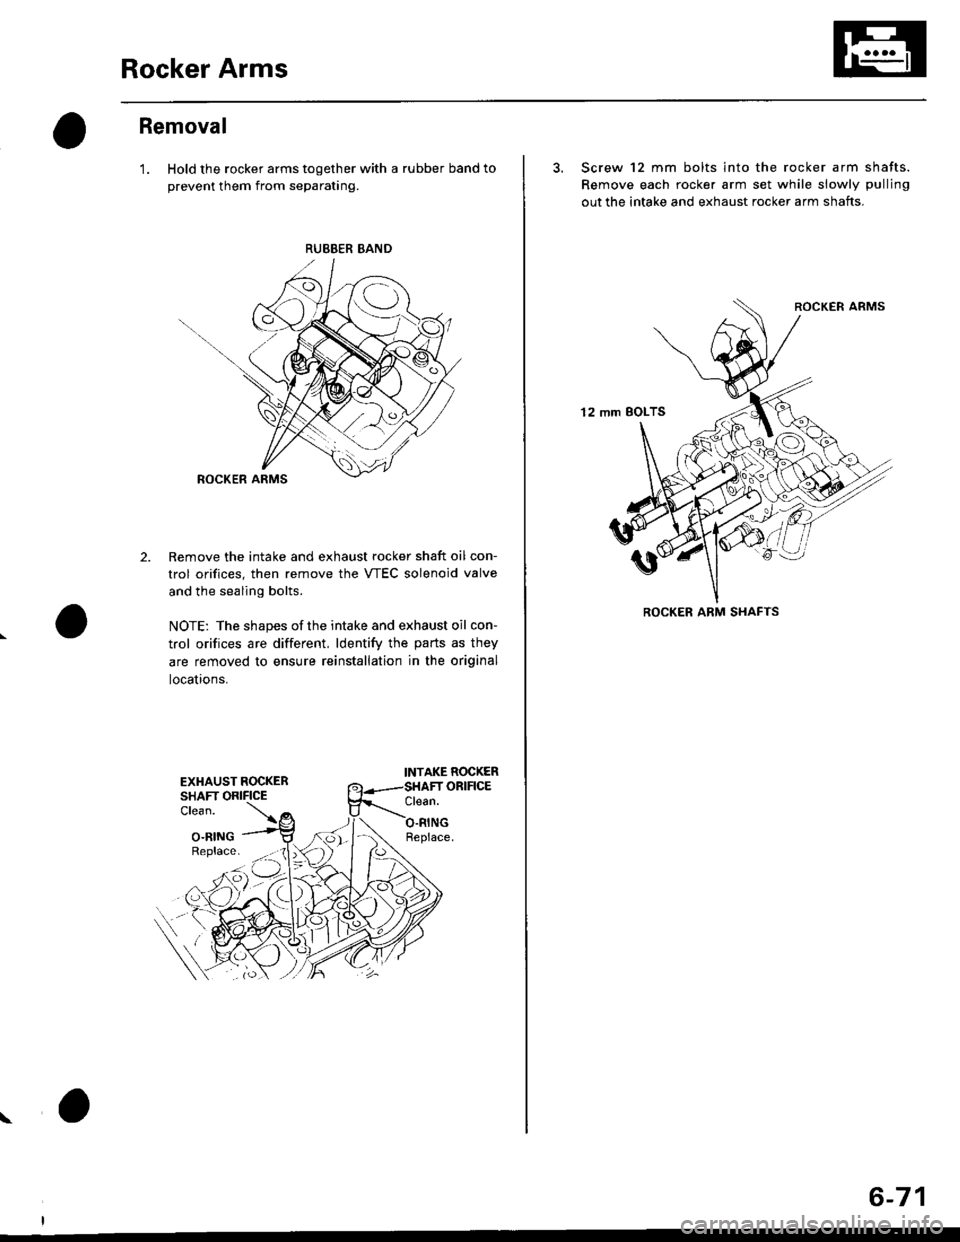 HONDA CIVIC 1998 6.G Owners Manual Rocker Arms
Removal
1. Hold the rocker arms together with a rubber band to
prevent them from separating.
Remove the intake and exhaust rocker shaft oil con-
trol orifices, then remove the VTEC soleno